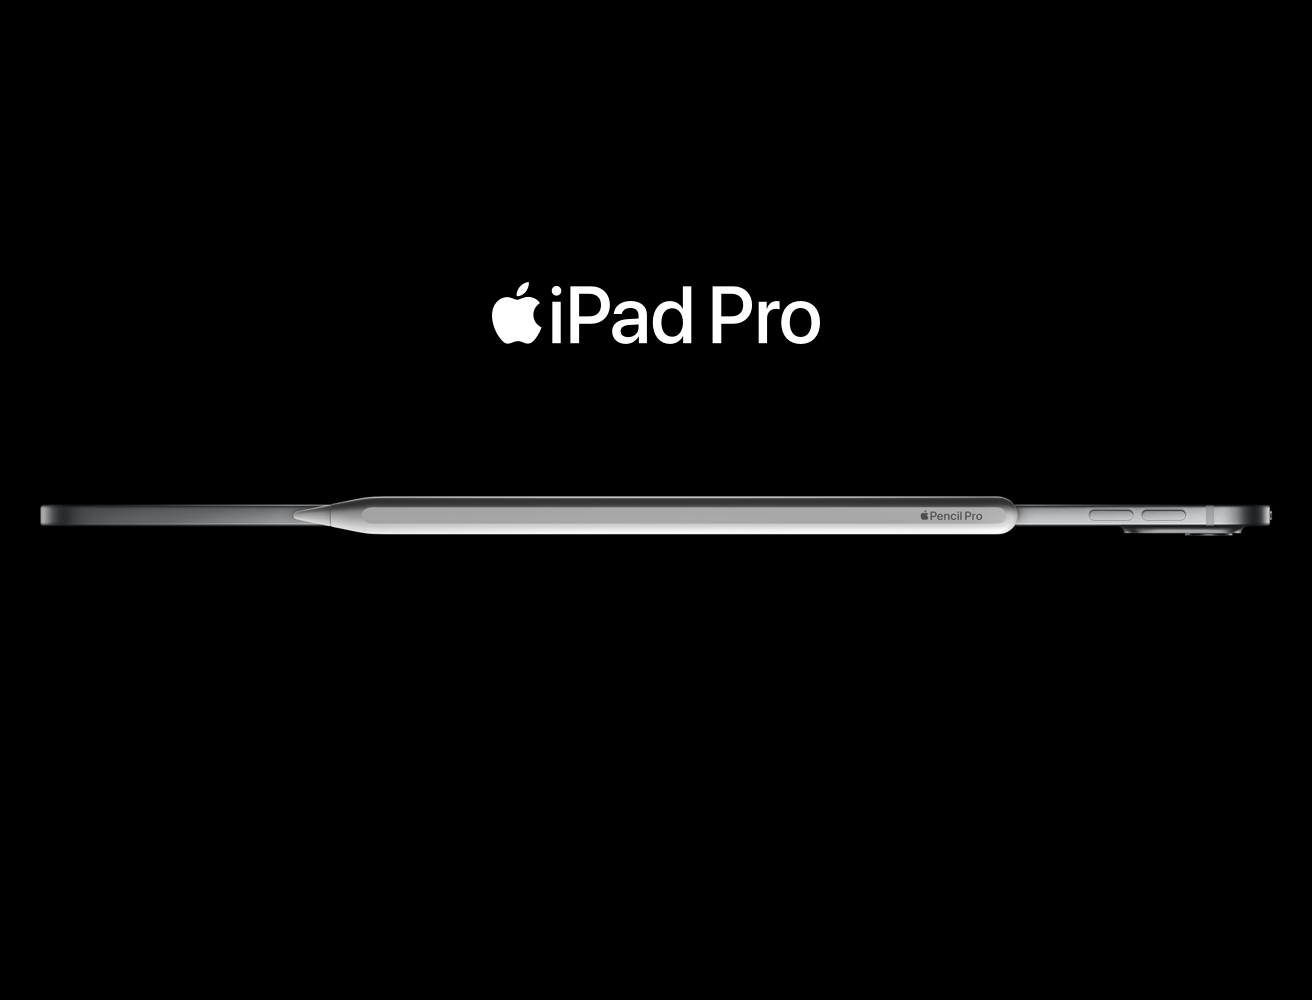 Horizontal side view of the iPad Pro M4 and Apple Pro Pencil to demonstrate that the iPad is thinner than the pencil.